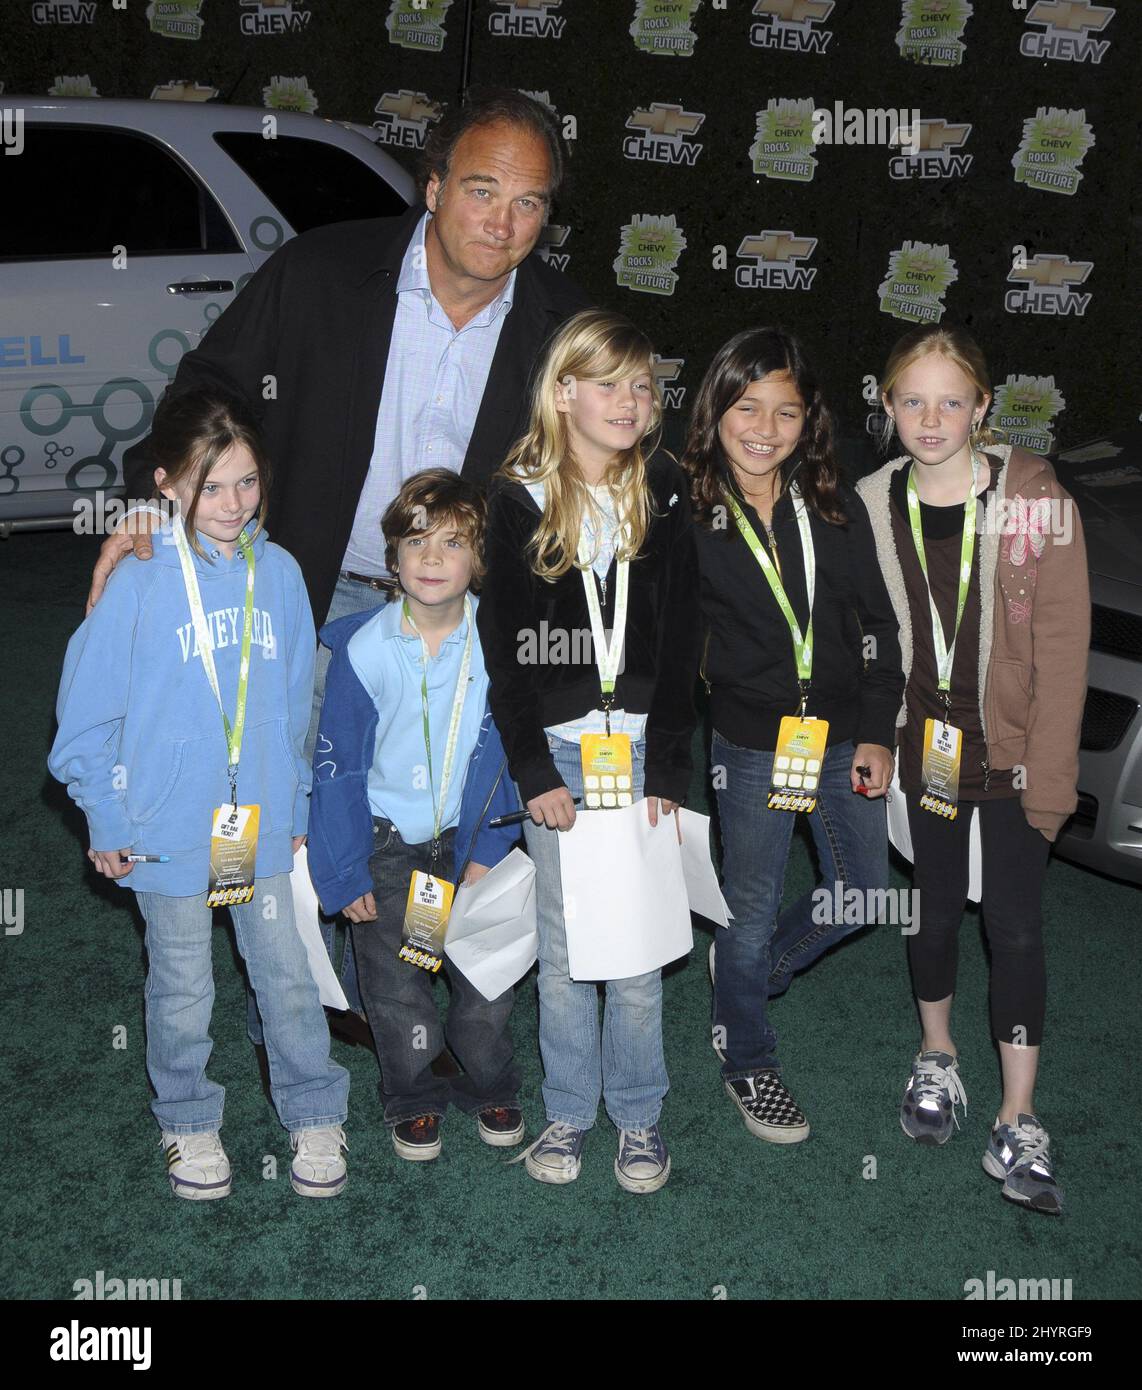 Jim Belushi with kids and friends arriving at Chevy Rocks the Future event held at Walt Disney Studios Burbank, CA. Stock Photo